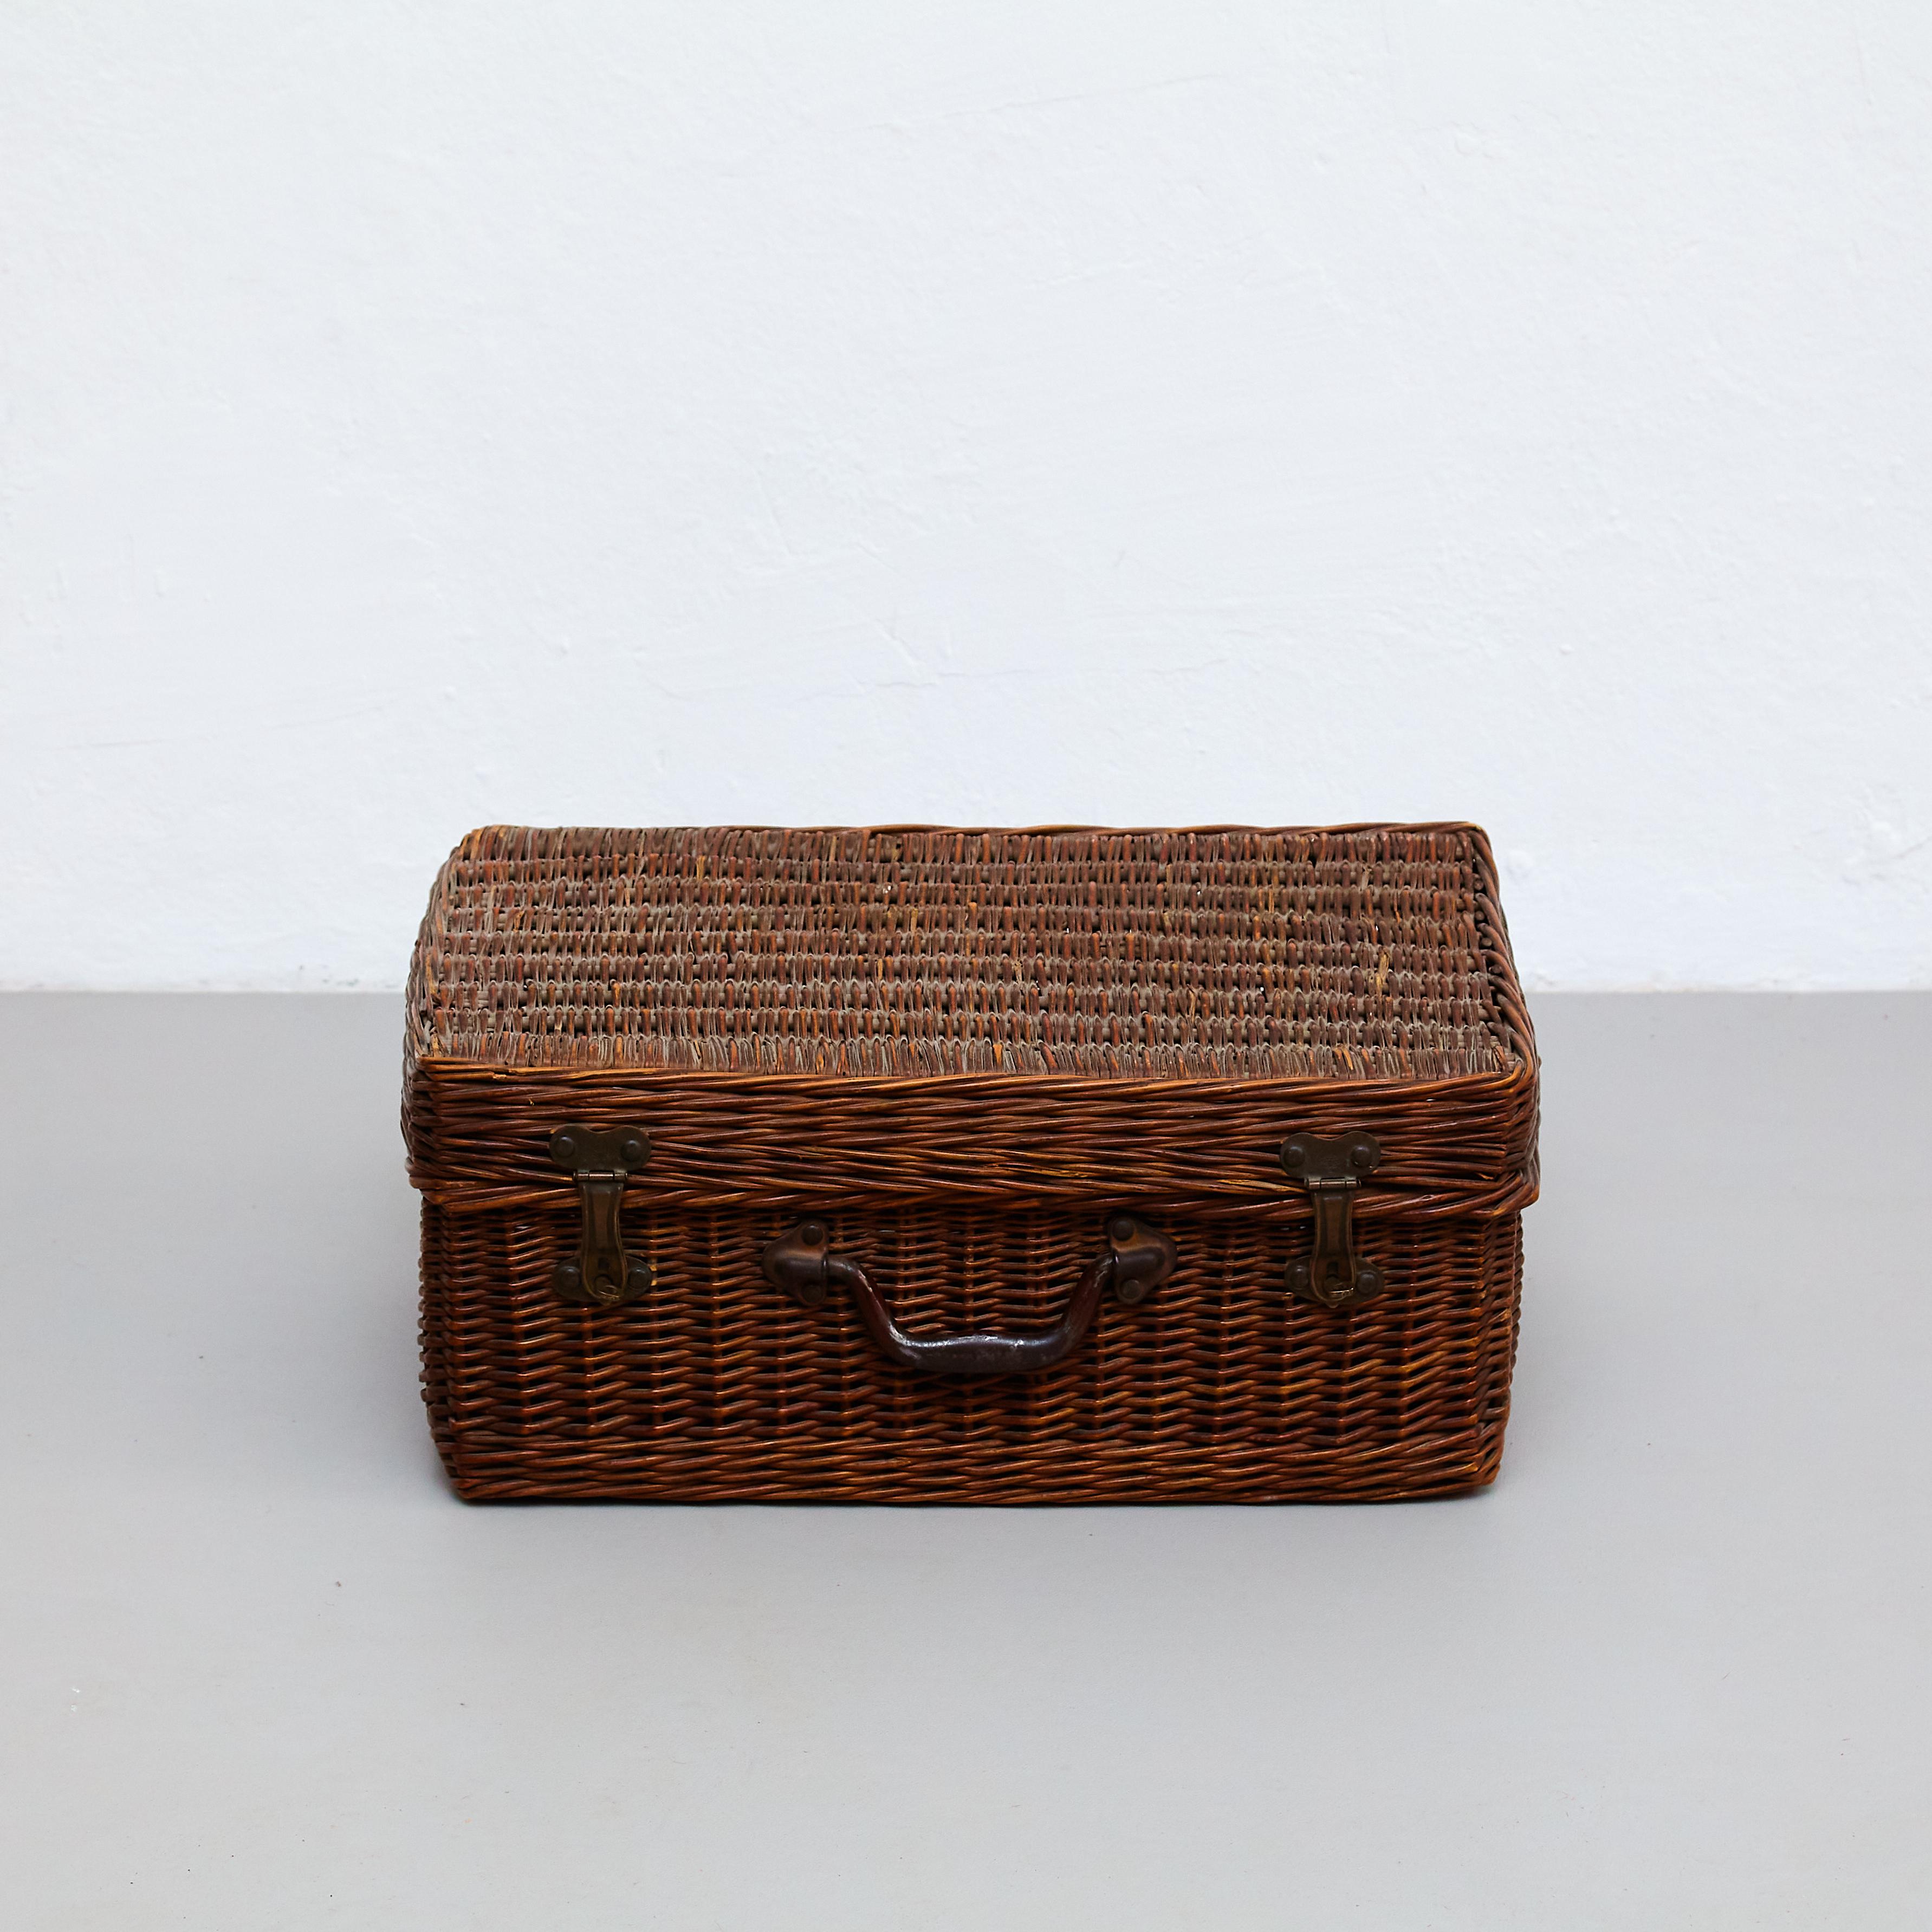 Mid-Century Modern French rattan basket.

In original condition with minor wear consistent of age and use, preserving a beautiful patina.

Materials: 
Rattan 

Dimensions: 
D 32 cm x W 51.7 cm x H 22.5 cm.

Important information regarding